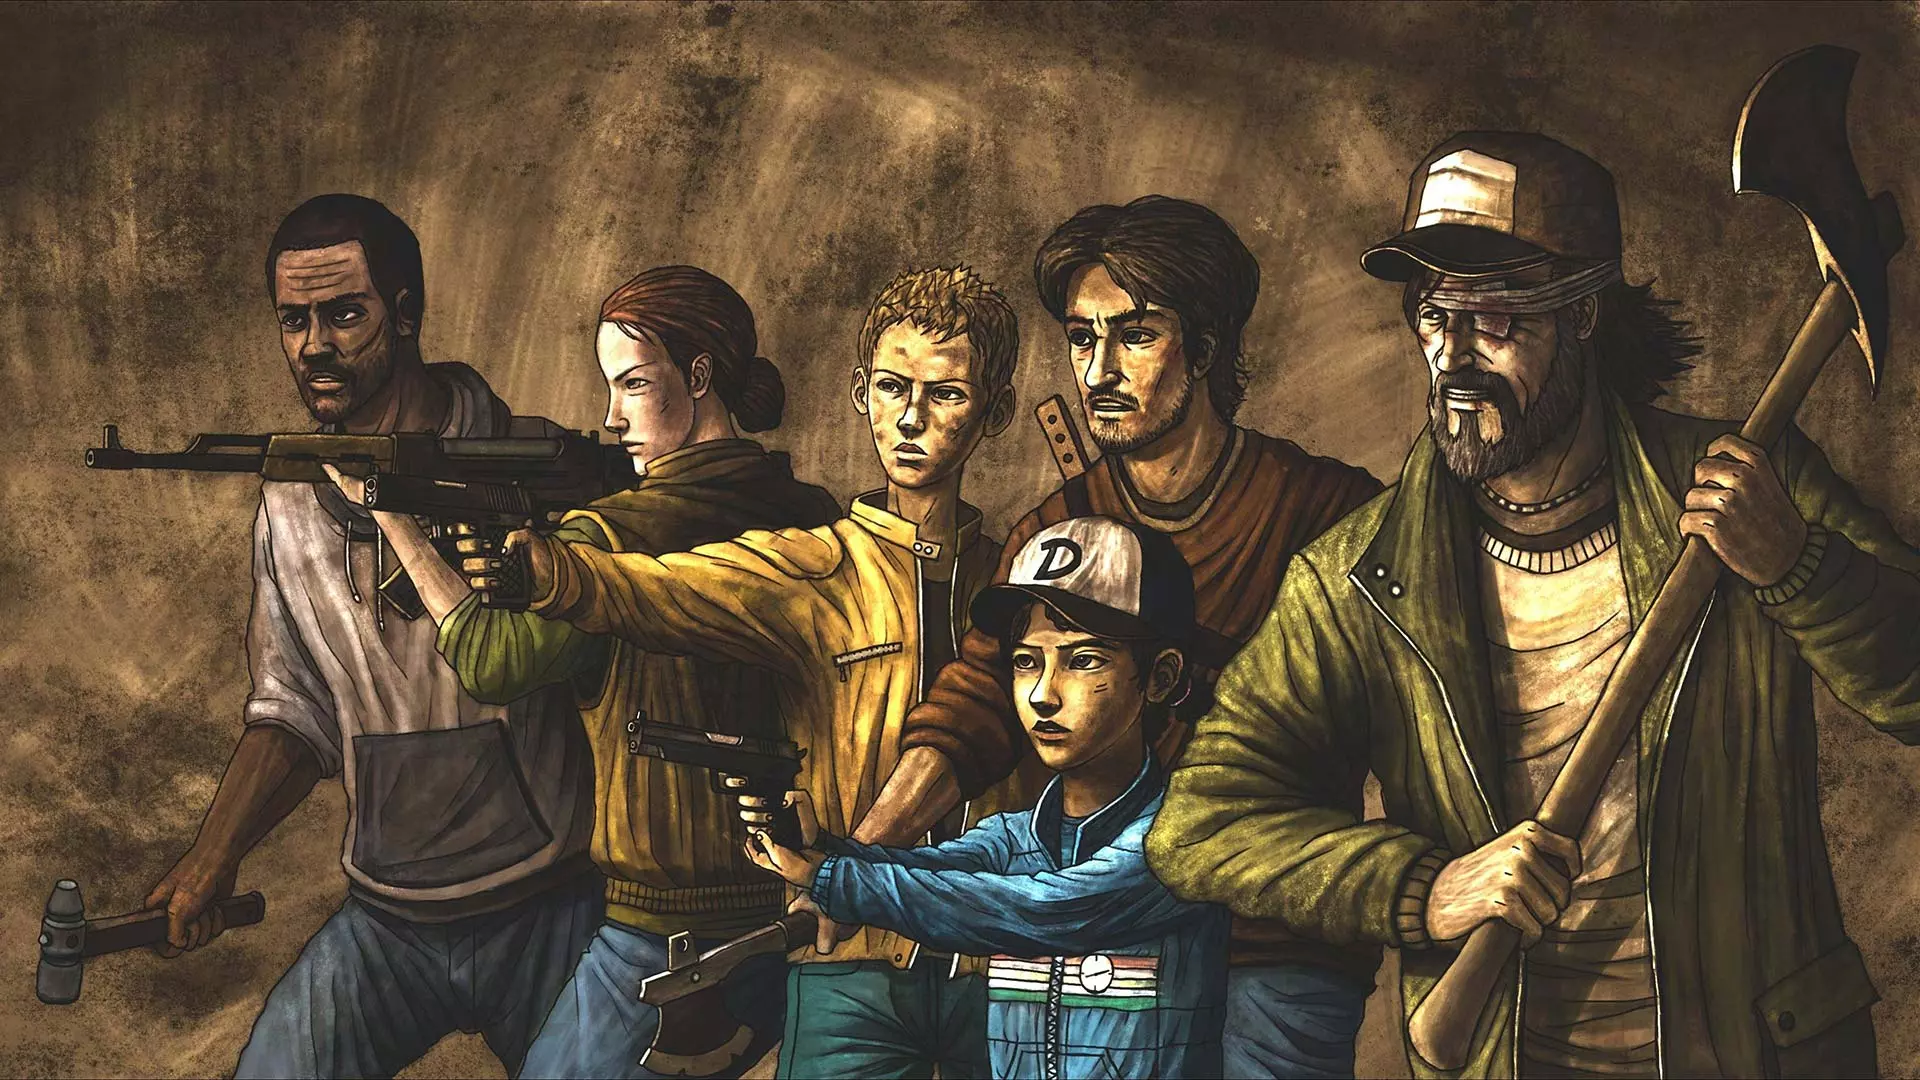 Clementine in the poster for The Walking Dead